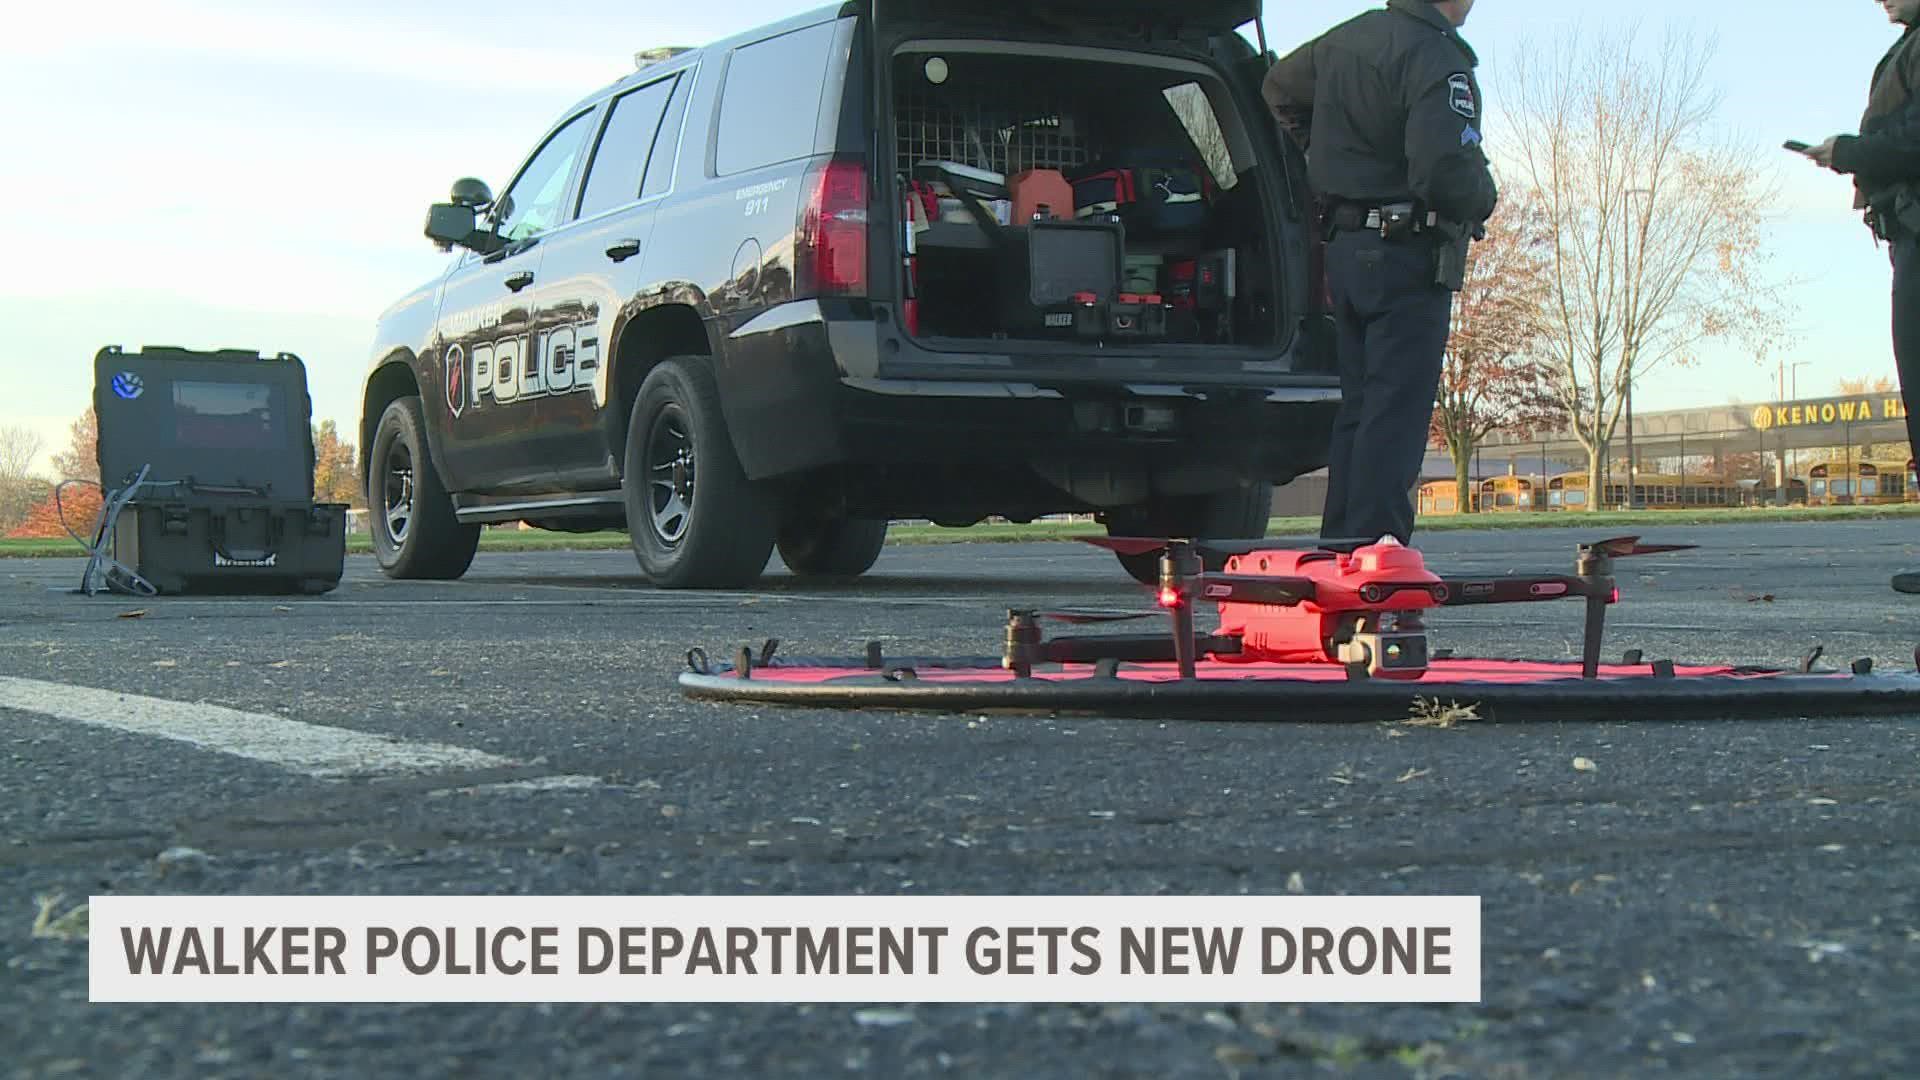 If you live in the City of Walker and happen to see an orange and black drone flying around, the Police Department is likely on a case.